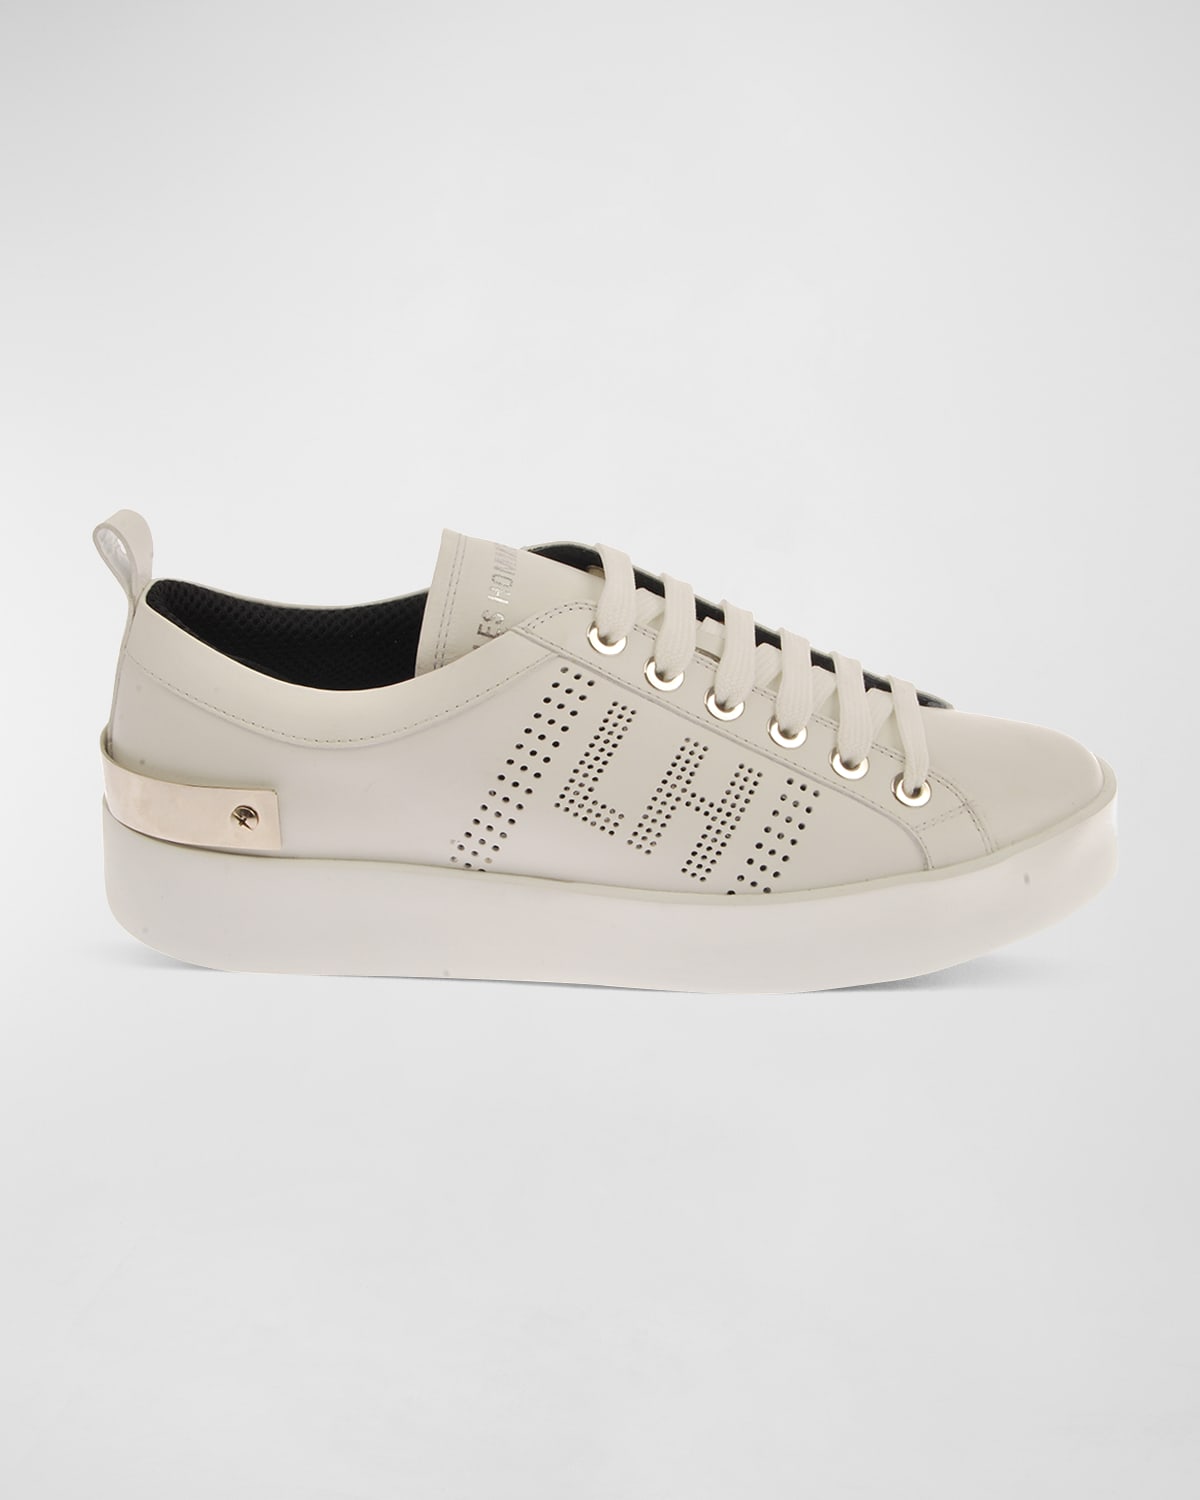 Men's Perforated Logo Leather Low-Top Sneakers